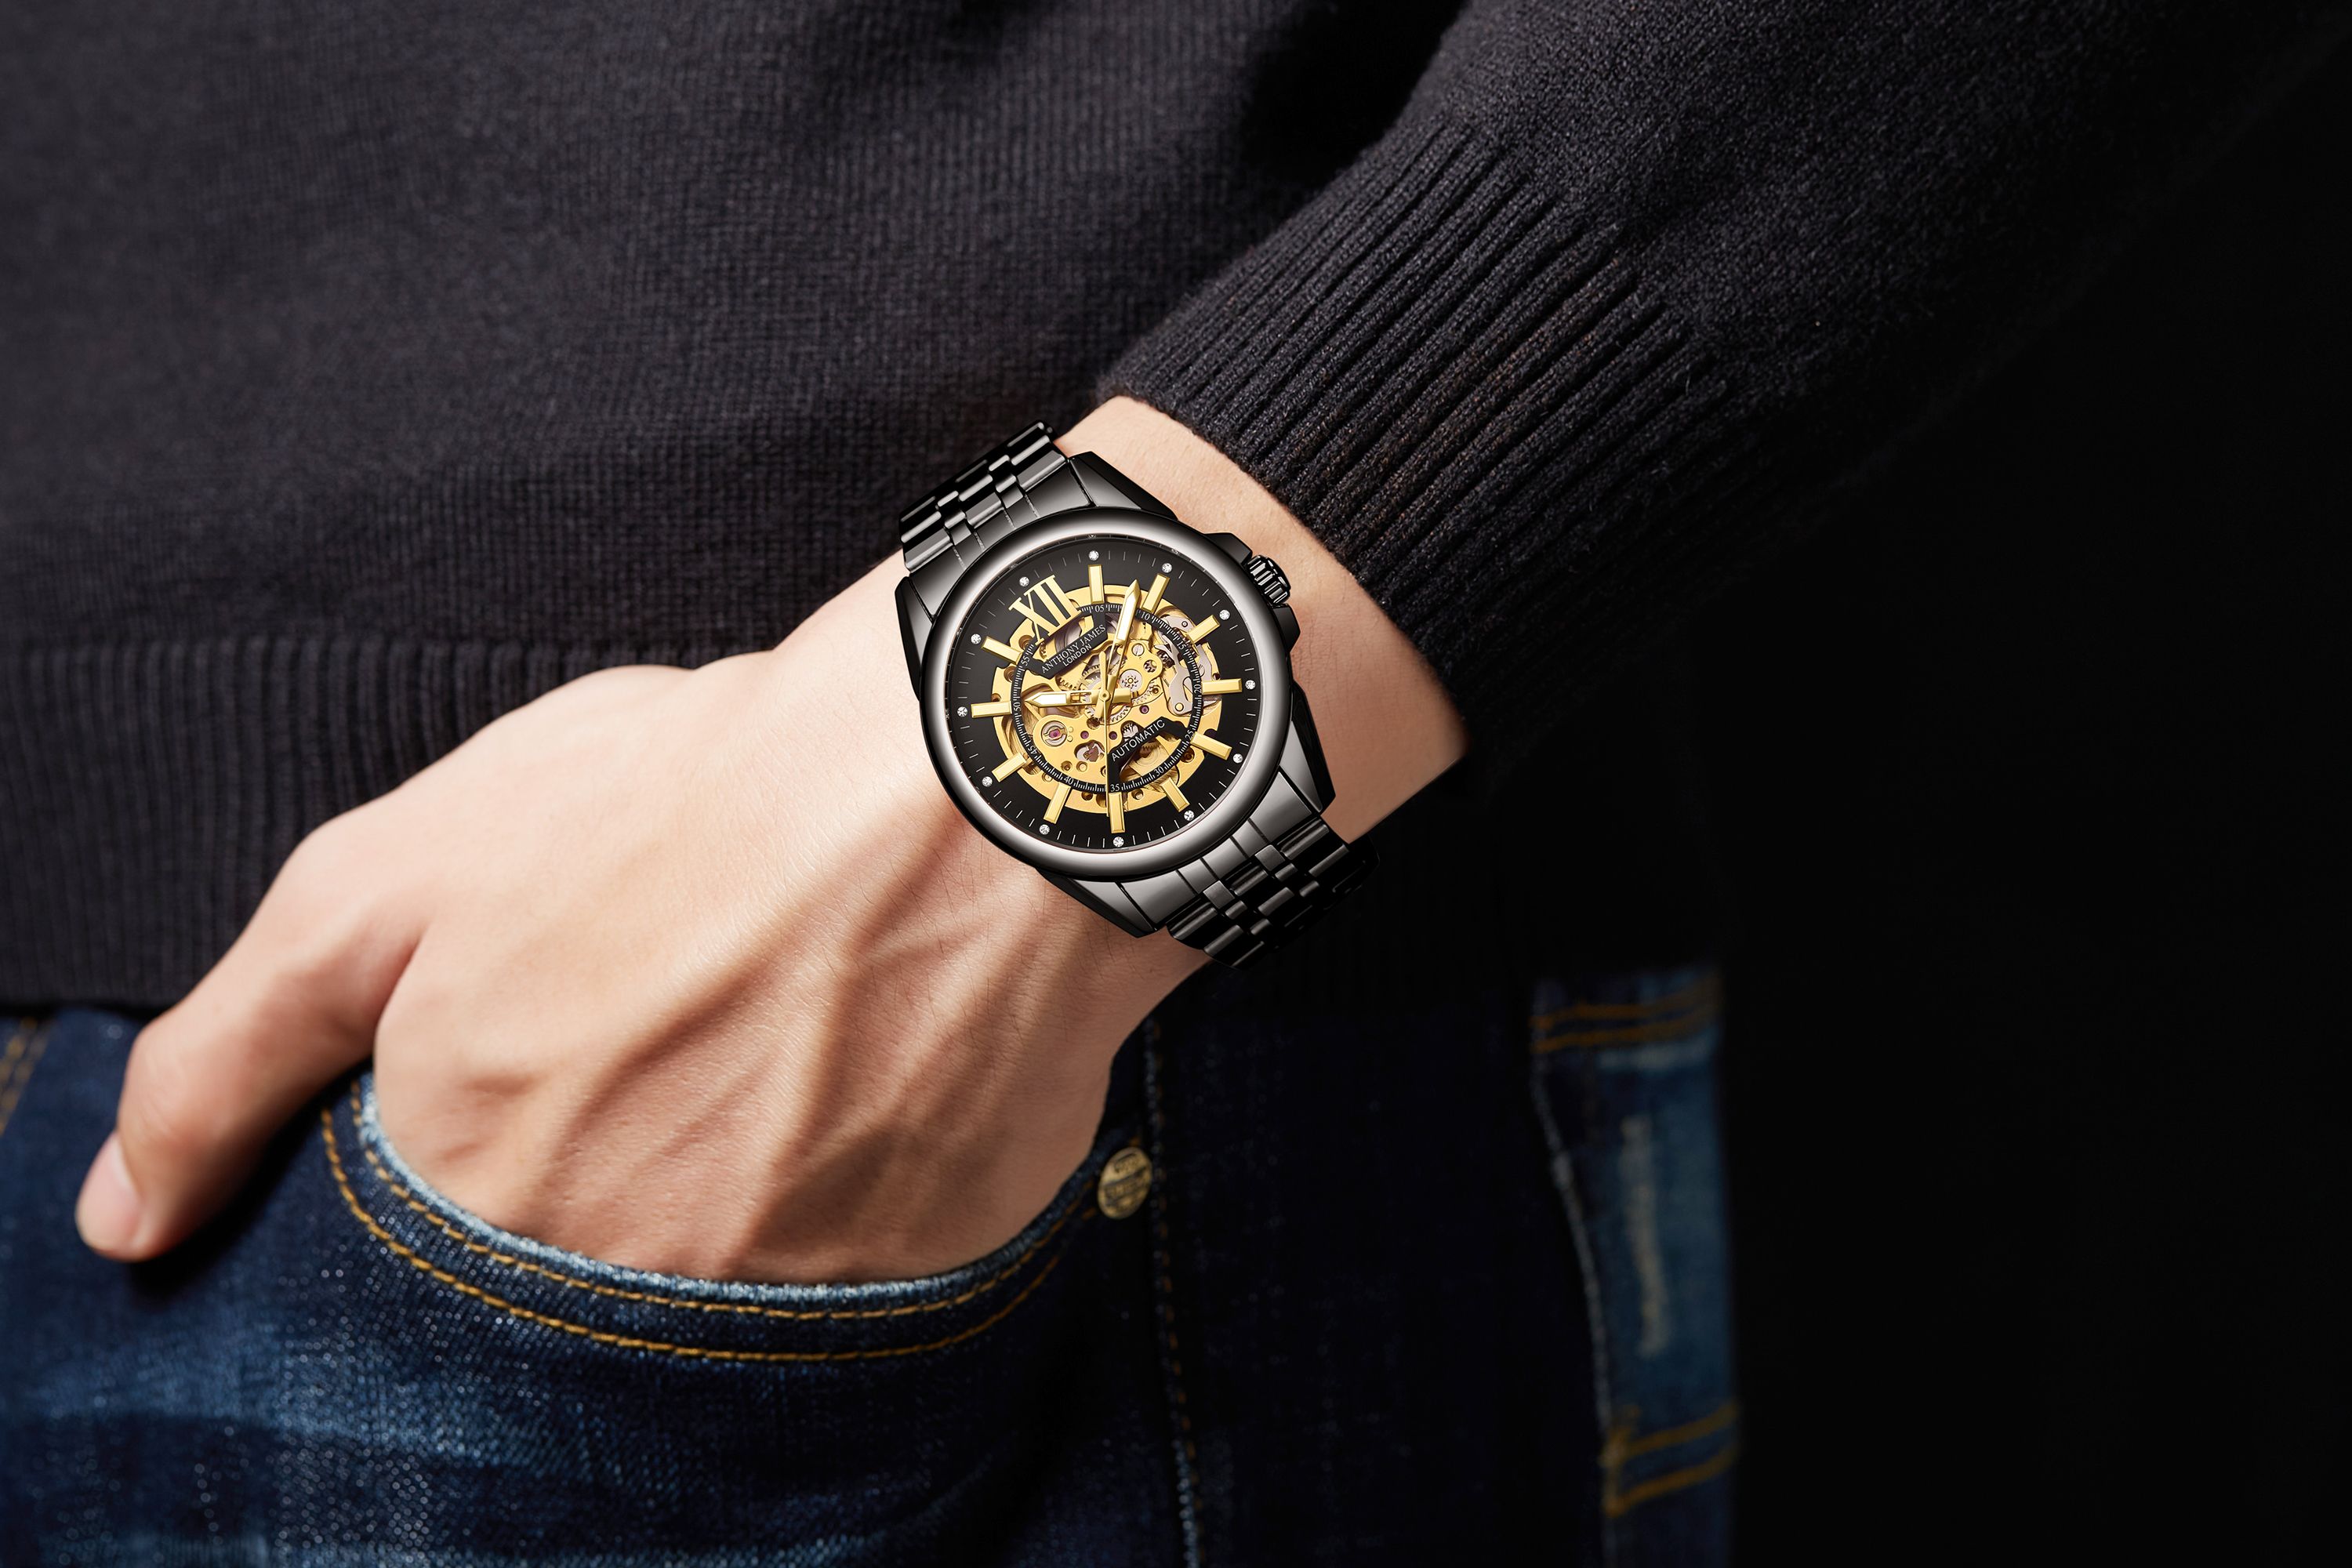 The Hand Assembled Anthony James Limited Edition Mystique Automatic Black men’s watch boasts 162 part 21 jewel movement and exhibits superb accuracy that is enhanced by the gold skeletonised dial, contrasting boldly against the black border, and this same engineering is viewable from the caseback. It is water resistant to 3ATM, while the scratch resistant mineral glass is both sophisticated and reliable. The raven black IP stainless steel bracelet secures the timepiece, which comes complete with a five-year warranty.

Watch Specification
• Automatic Movement
• Hand Assembled 162 Part 21 Jewel Movement
• Black with Gold Skeletonised Dial 
• Water Resistant 3ATM
• Scratch Resistant Mineral Glass
• 5 Year Warranty

Sizes & Weights
• Case Diameter 42 mm 
• Case Thickness 14 mm
• Lug Width 22 mm
• Strap Width 20 mm
• Strap Length 220 mm
• Weight 123 Grams

Materials & Colour
• Steel & Alloy Case 
• Skeleton Caseback
• Black IP Stainless Steel Bracelet  
• Folding Safety Clasp with Logo
• Logo Crown